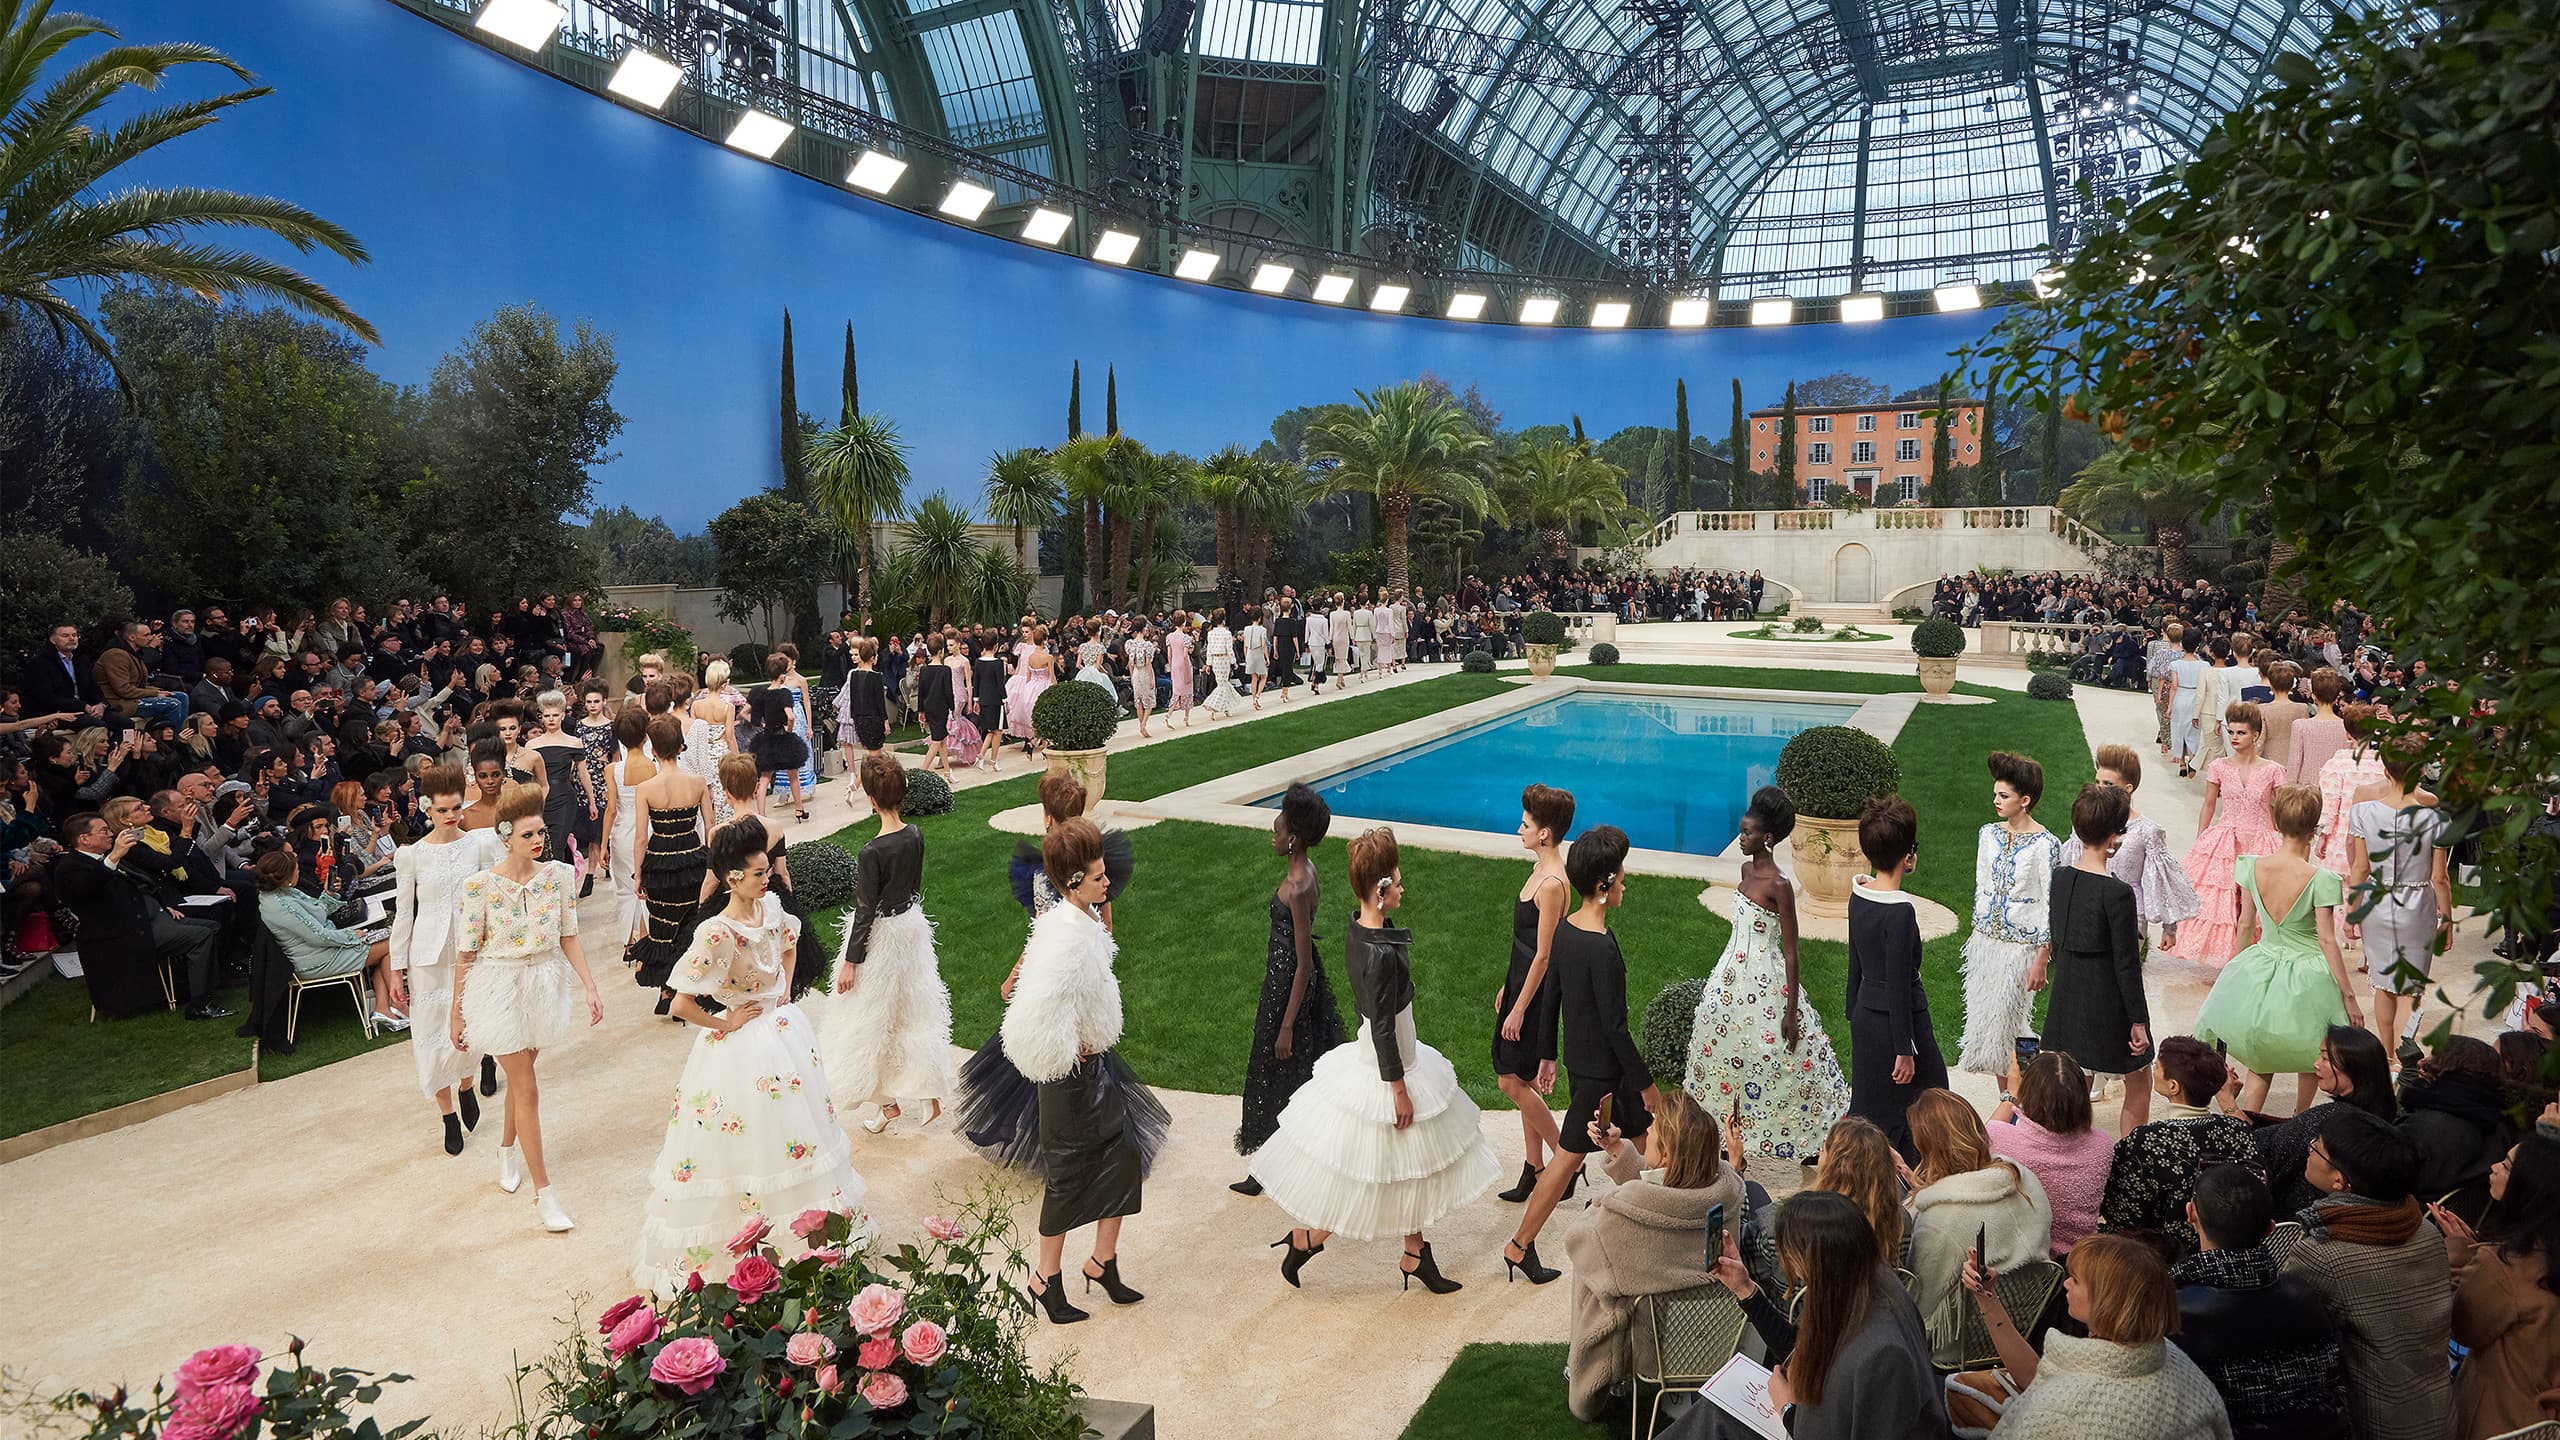 Paris Couture Week highlights, Burberry’s latest campaign, and more fashion news